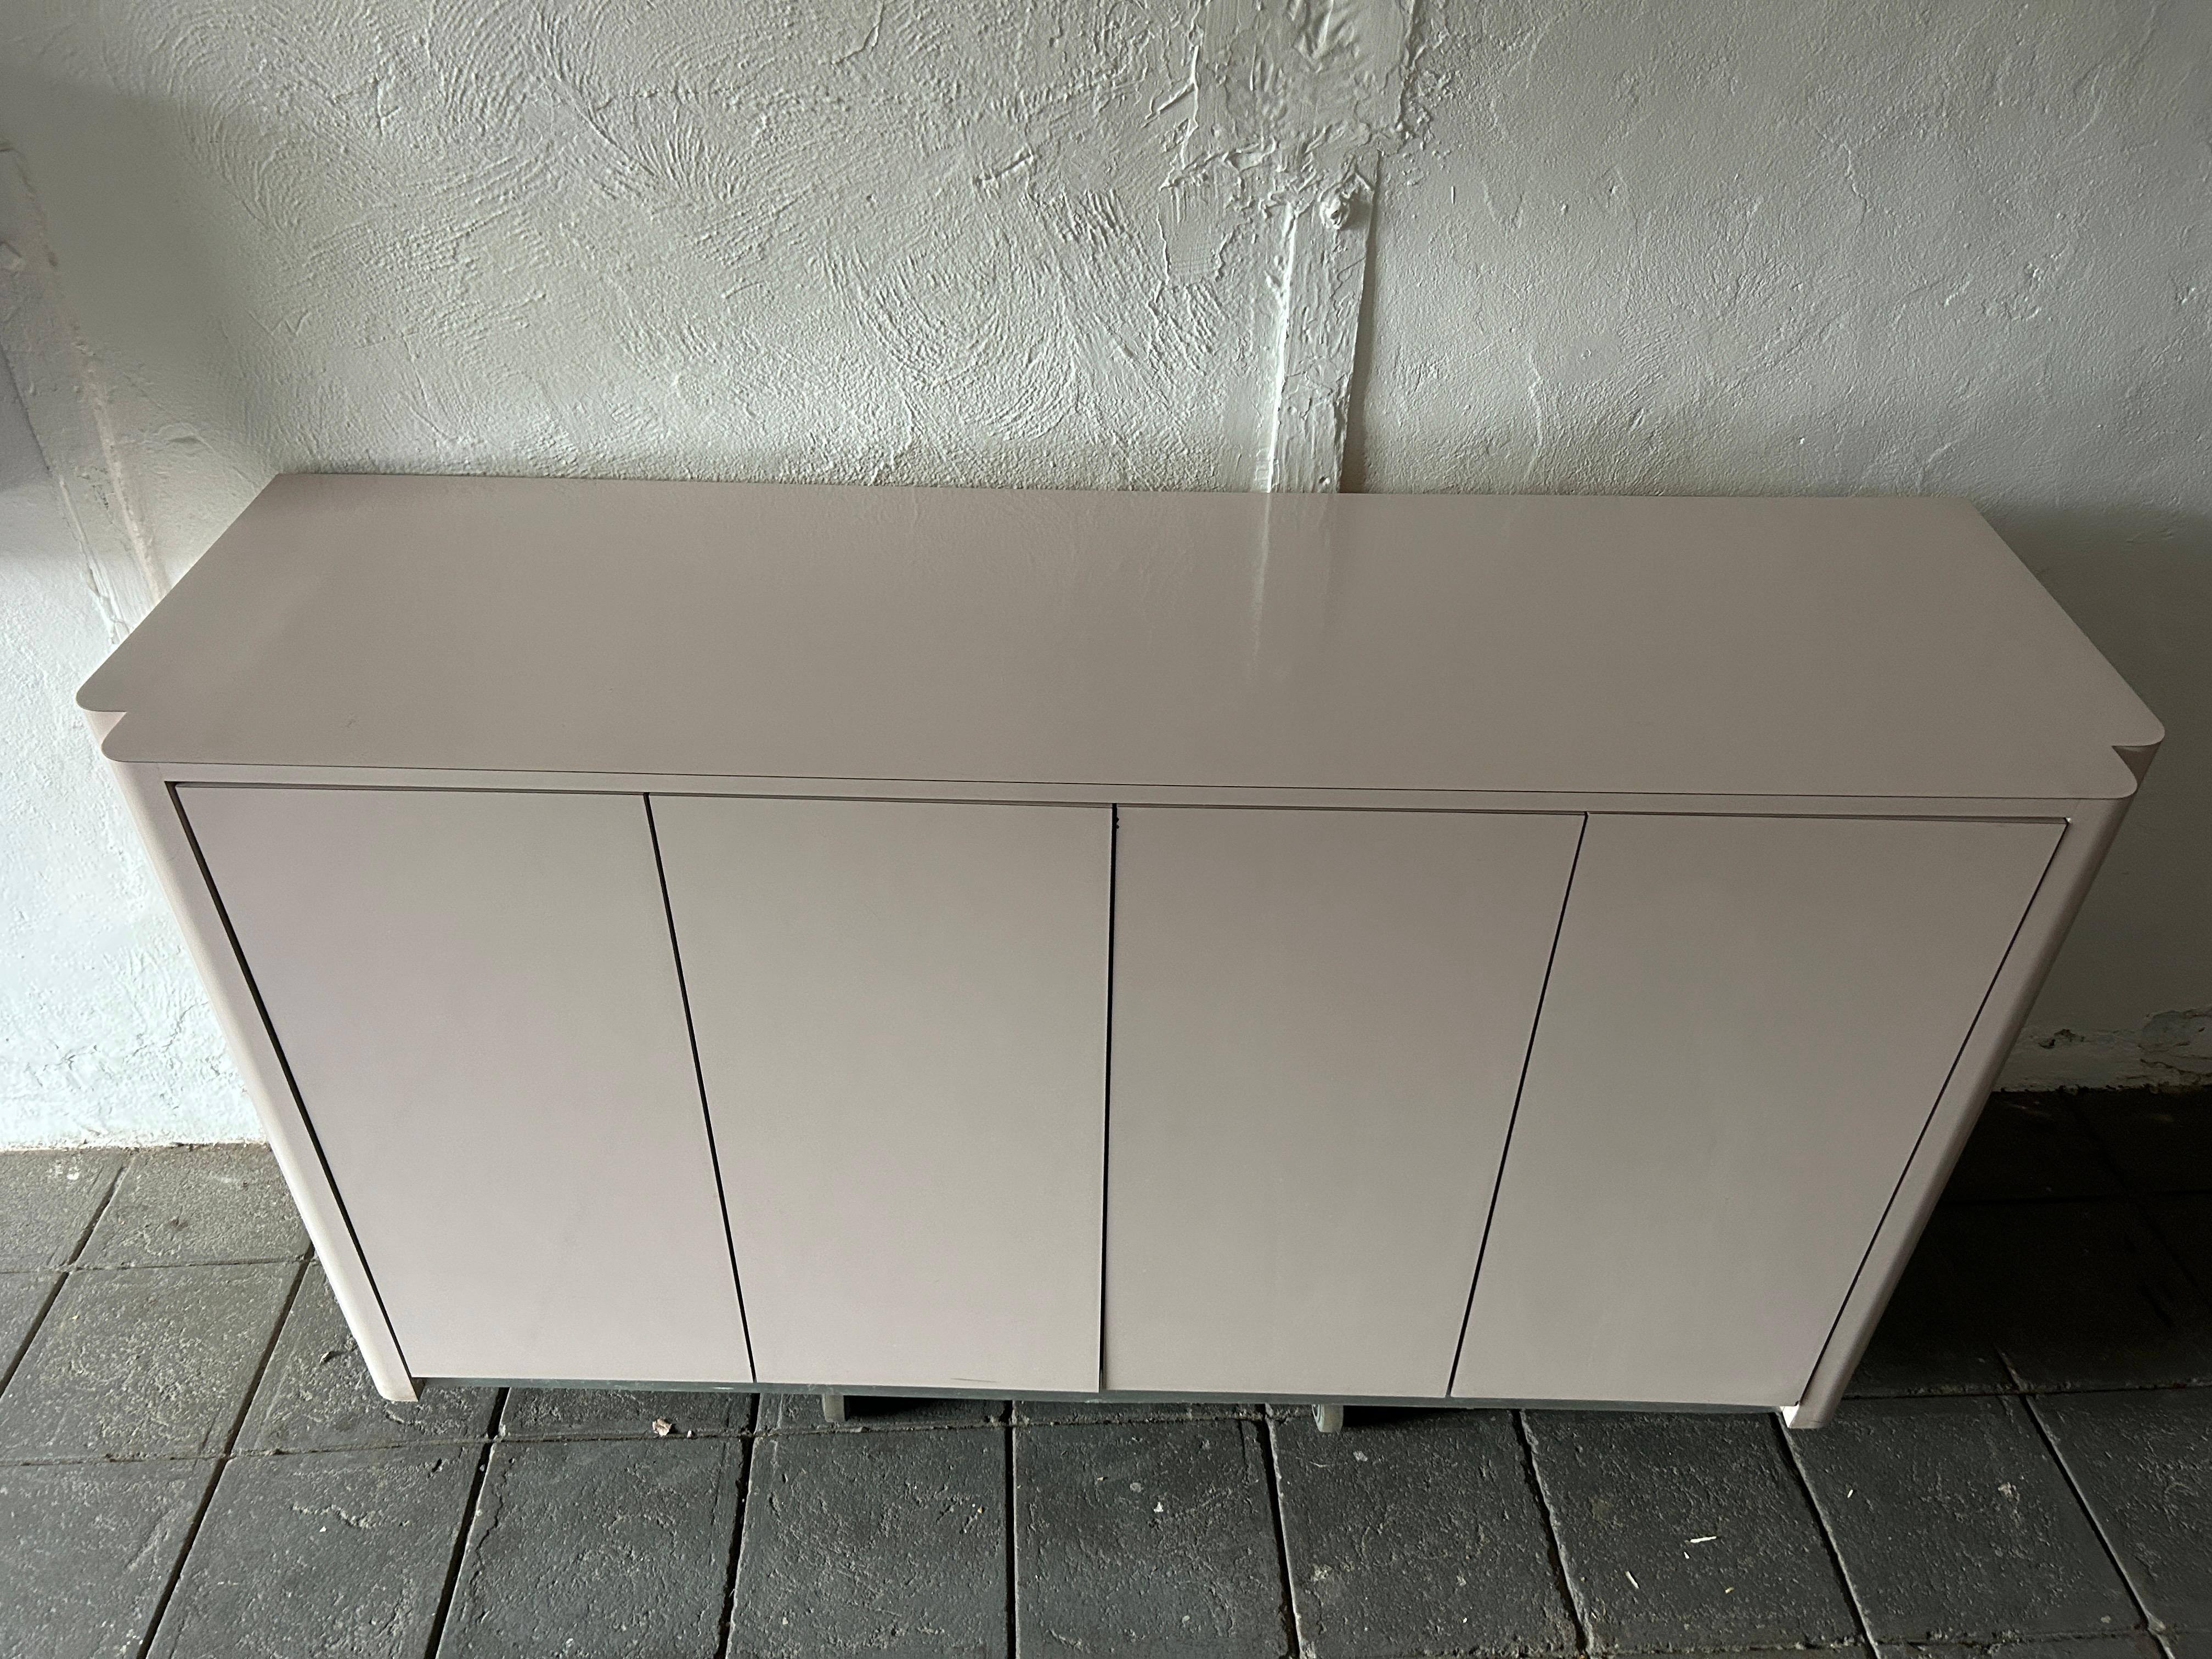 Pop art post modern 4 door muave pink credenza sideboard. Very light muted muave pink laminate credenza custom made circa 1980 has 4 cabinet doors with magnetic catches. Behind the doors are (4) adjustable shelves and (1) flatware drawer. Ready for